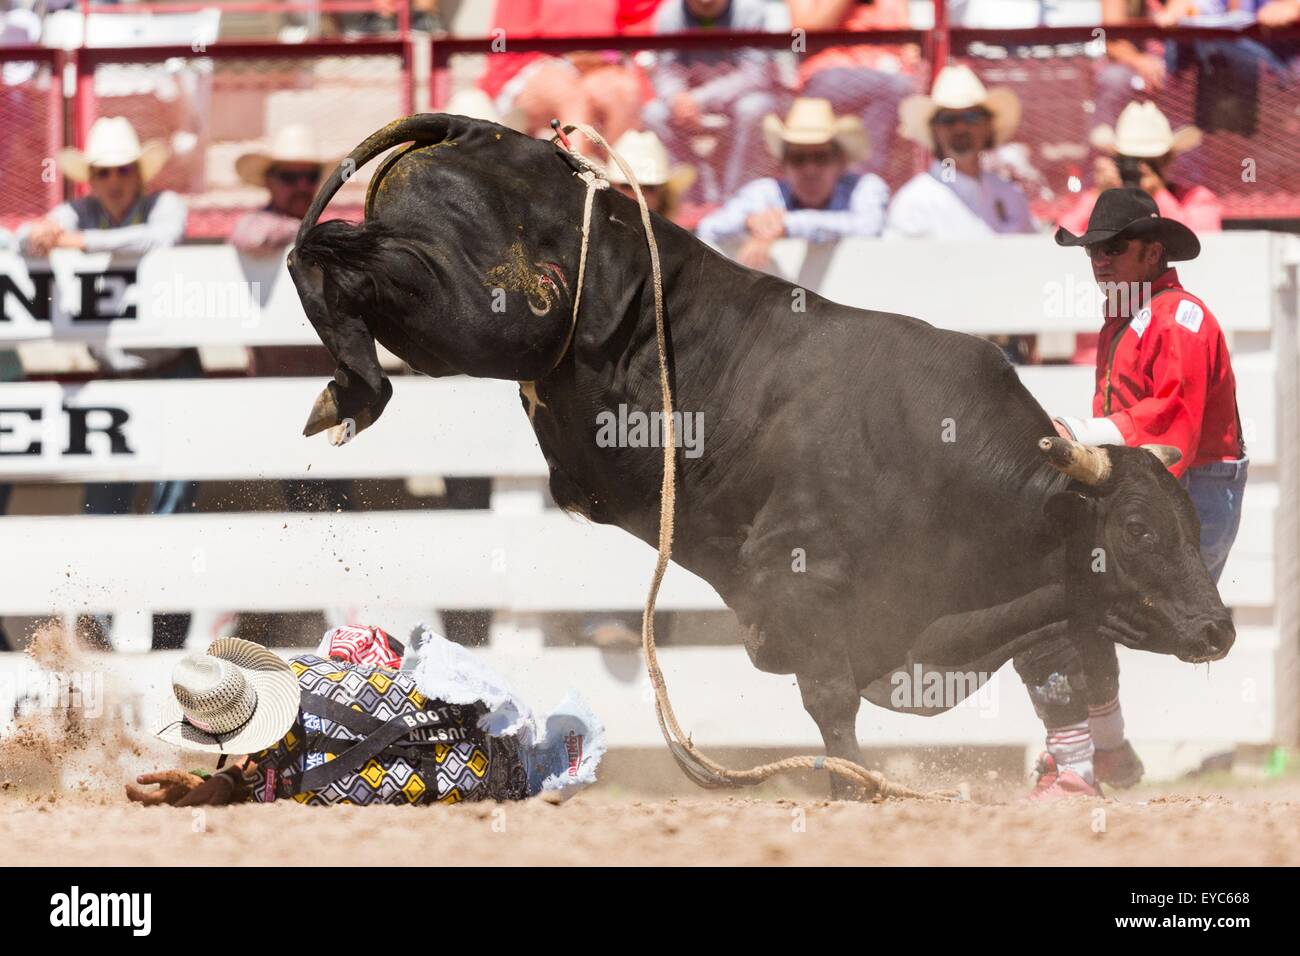 Cheyenne, Wyoming, USA. 26th July, 2015. Bullfighter Dusty Tuckness is stomped by an angry bull during the Bull Riding finals at the Cheyenne Frontier Days rodeo in Frontier Park Arena July 26, 2015 in Cheyenne, Wyoming. Frontier Days celebrates the cowboy traditions of the west with a rodeo, parade and fair. Stock Photo